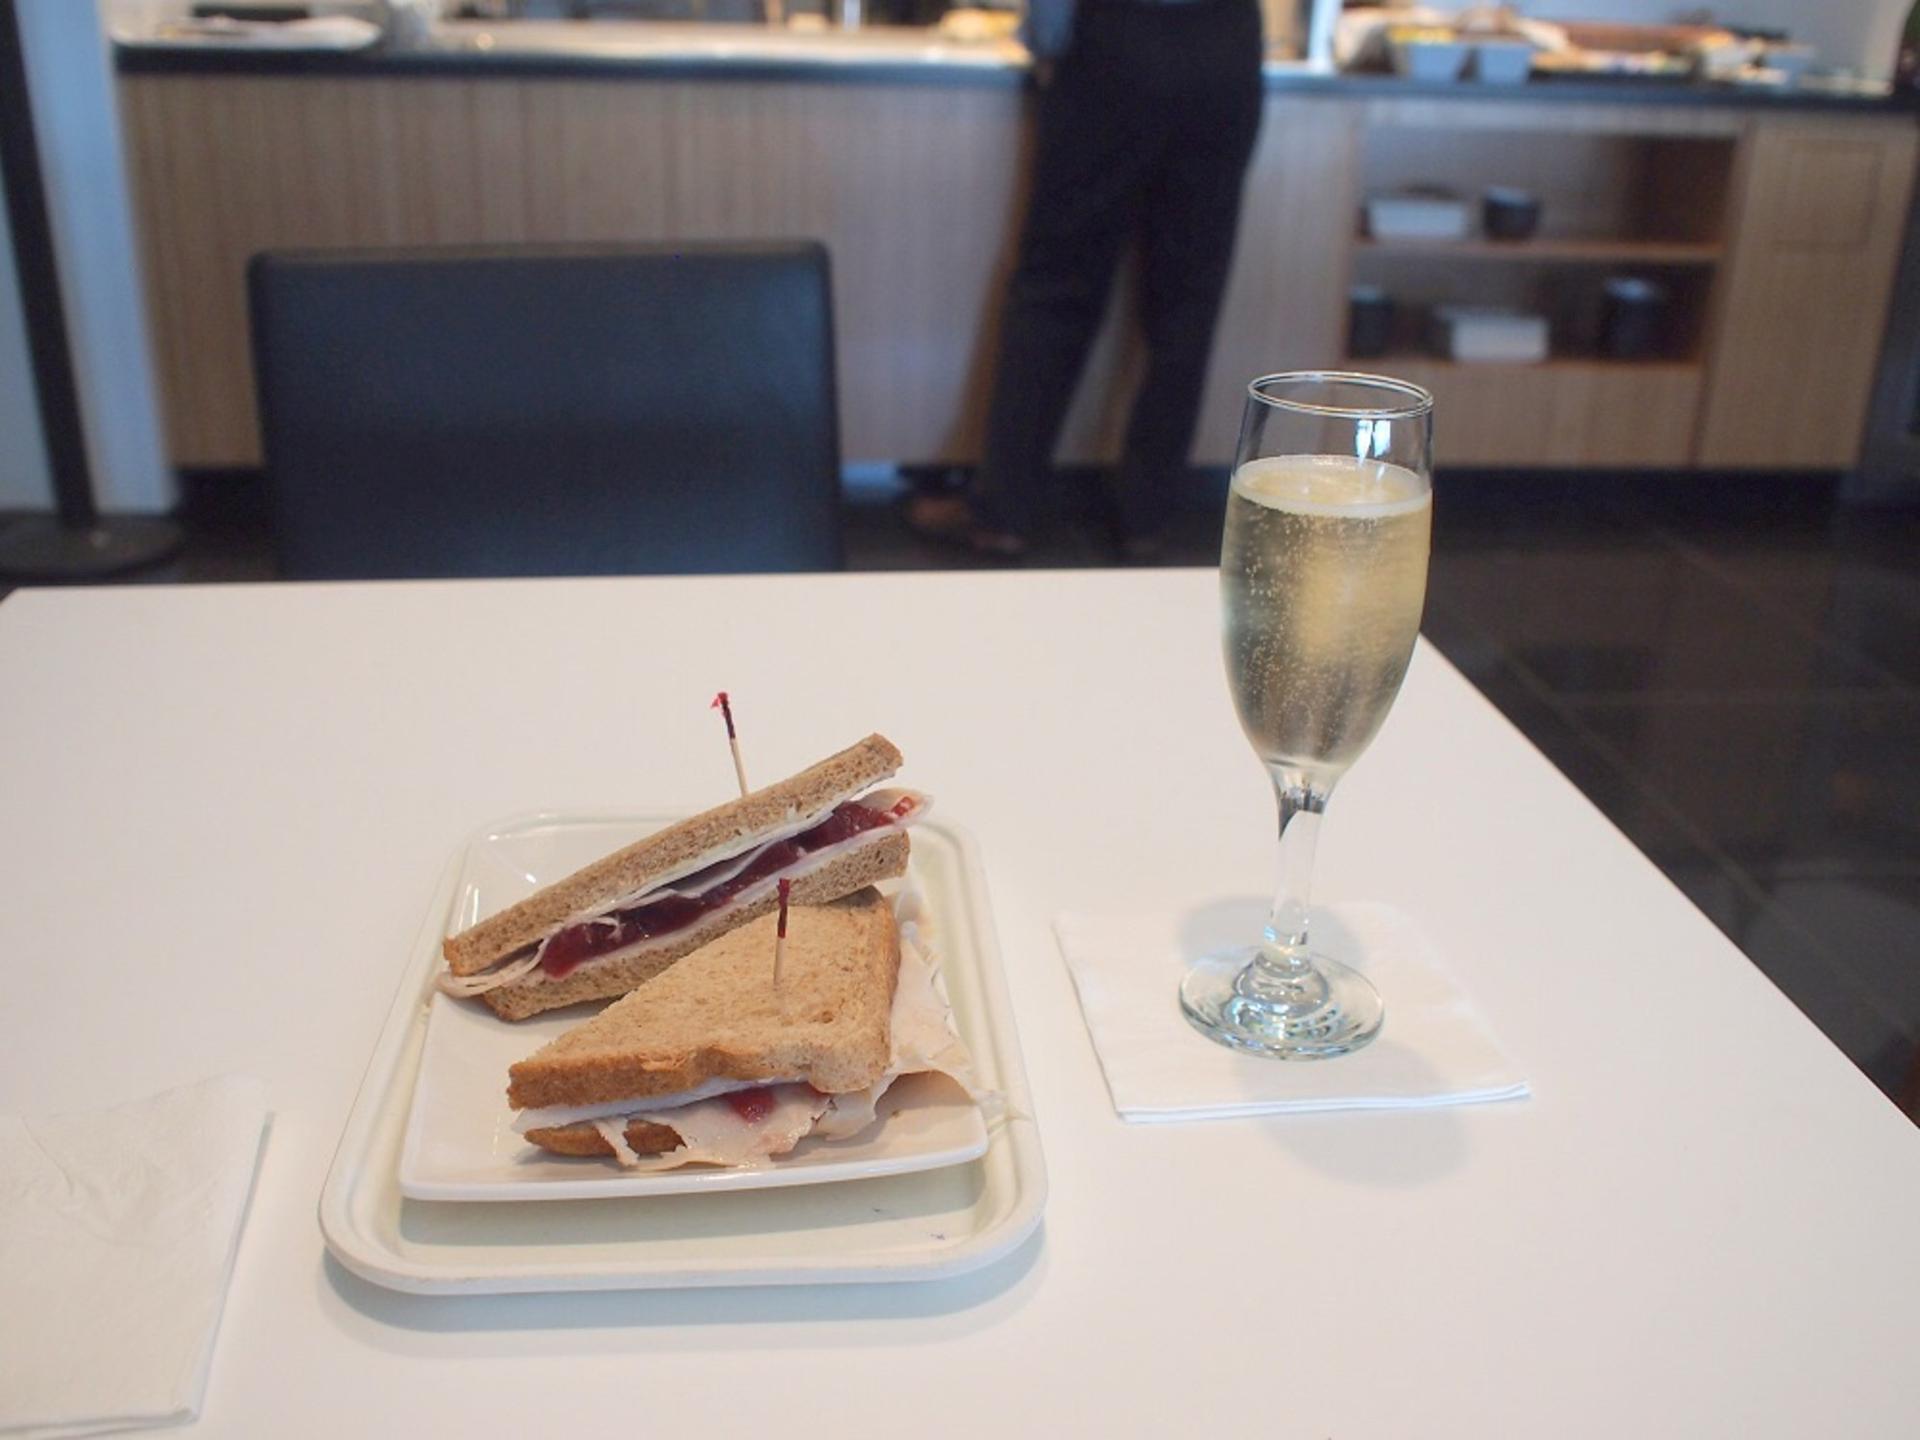 Cathay Pacific First and Business Class Lounge image 24 of 74